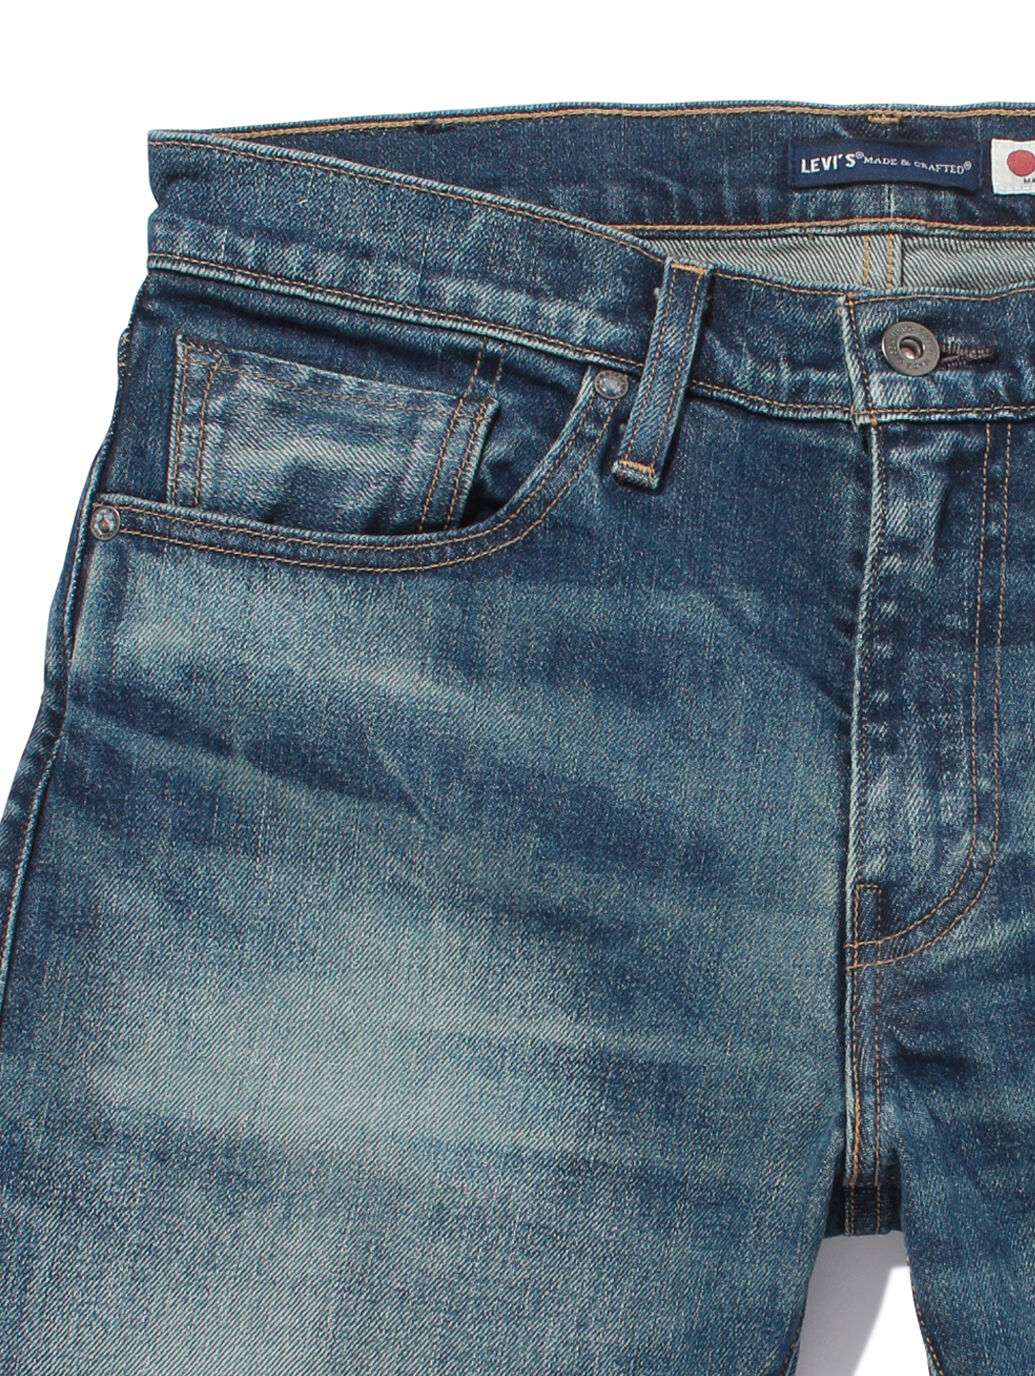 LEVI'S® MADE&CRAFTED®™ KAIYŌ MADE IN JAPAN｜リーバイス® 公式通販